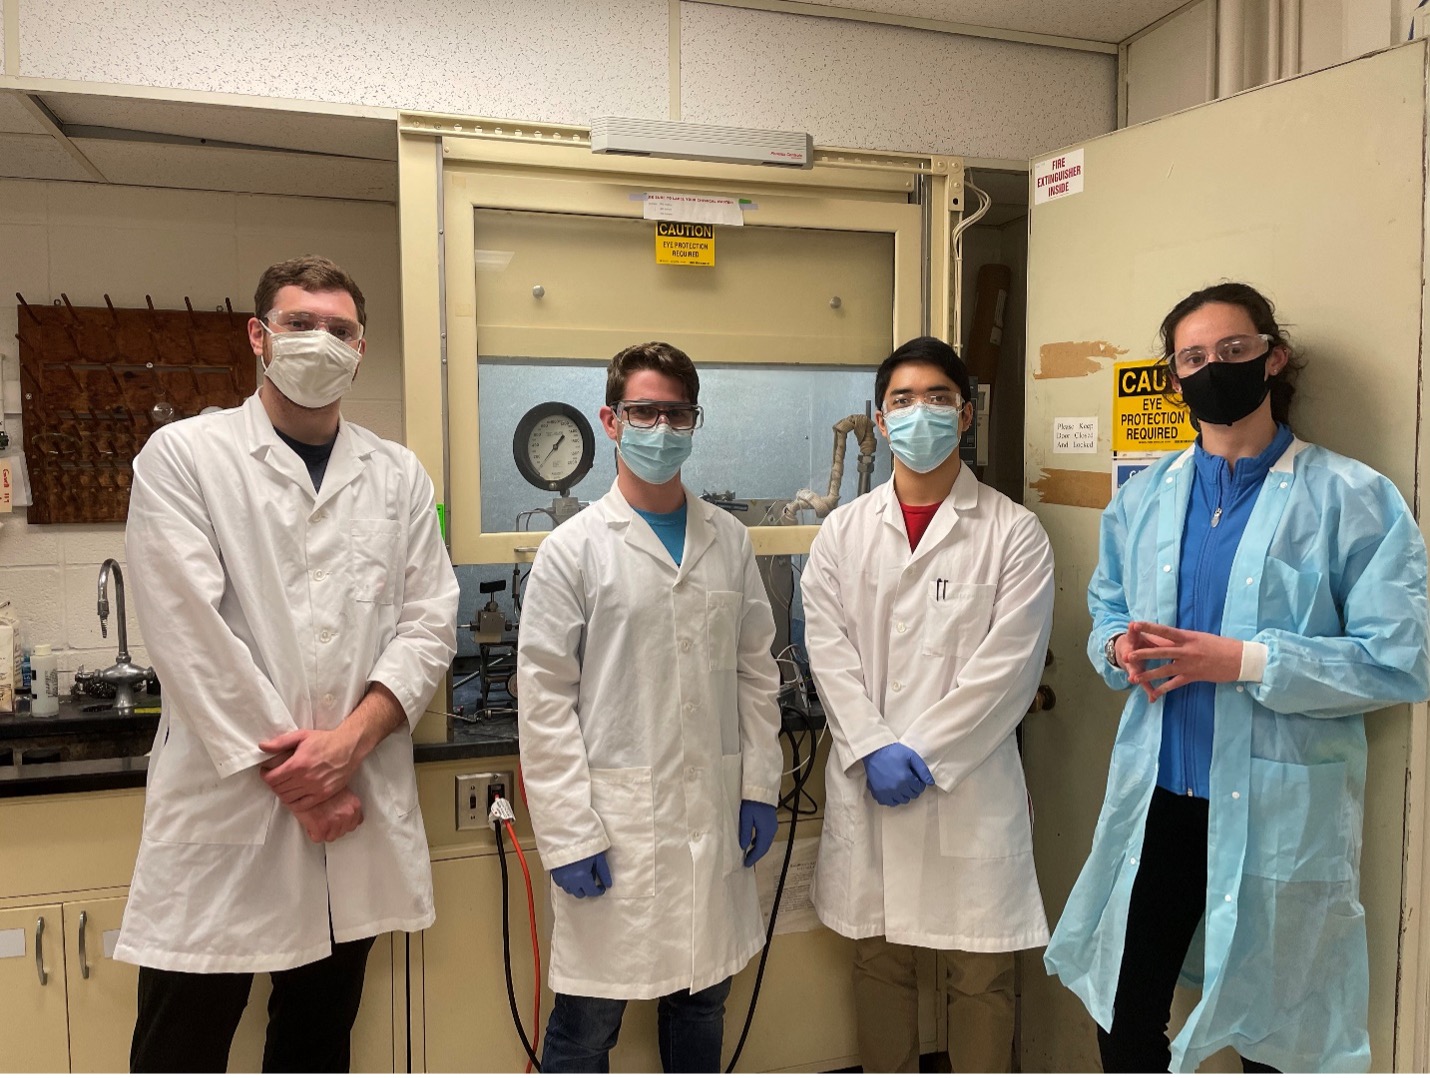 A group photo of students wearing lab coats.